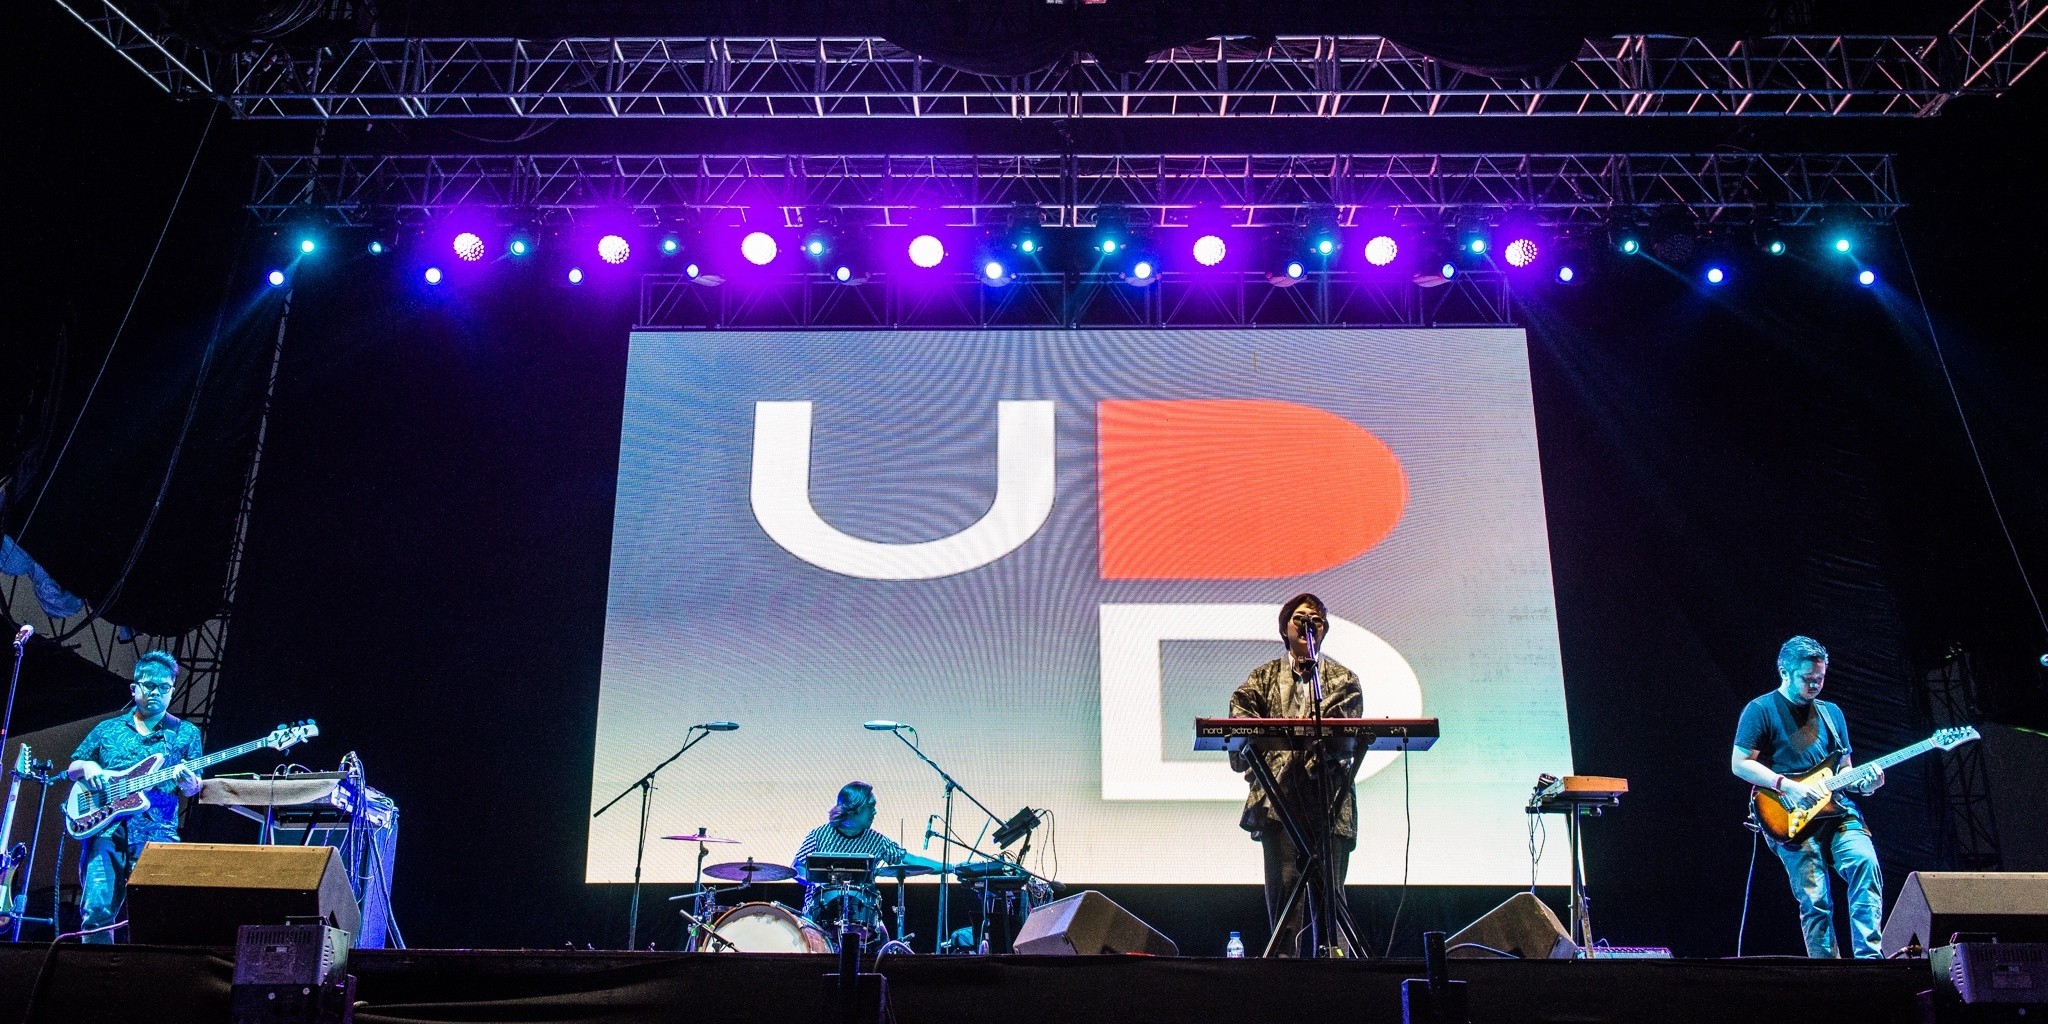 LISTEN: UDD rings in 2017 with their new name and new single "Sigurado"